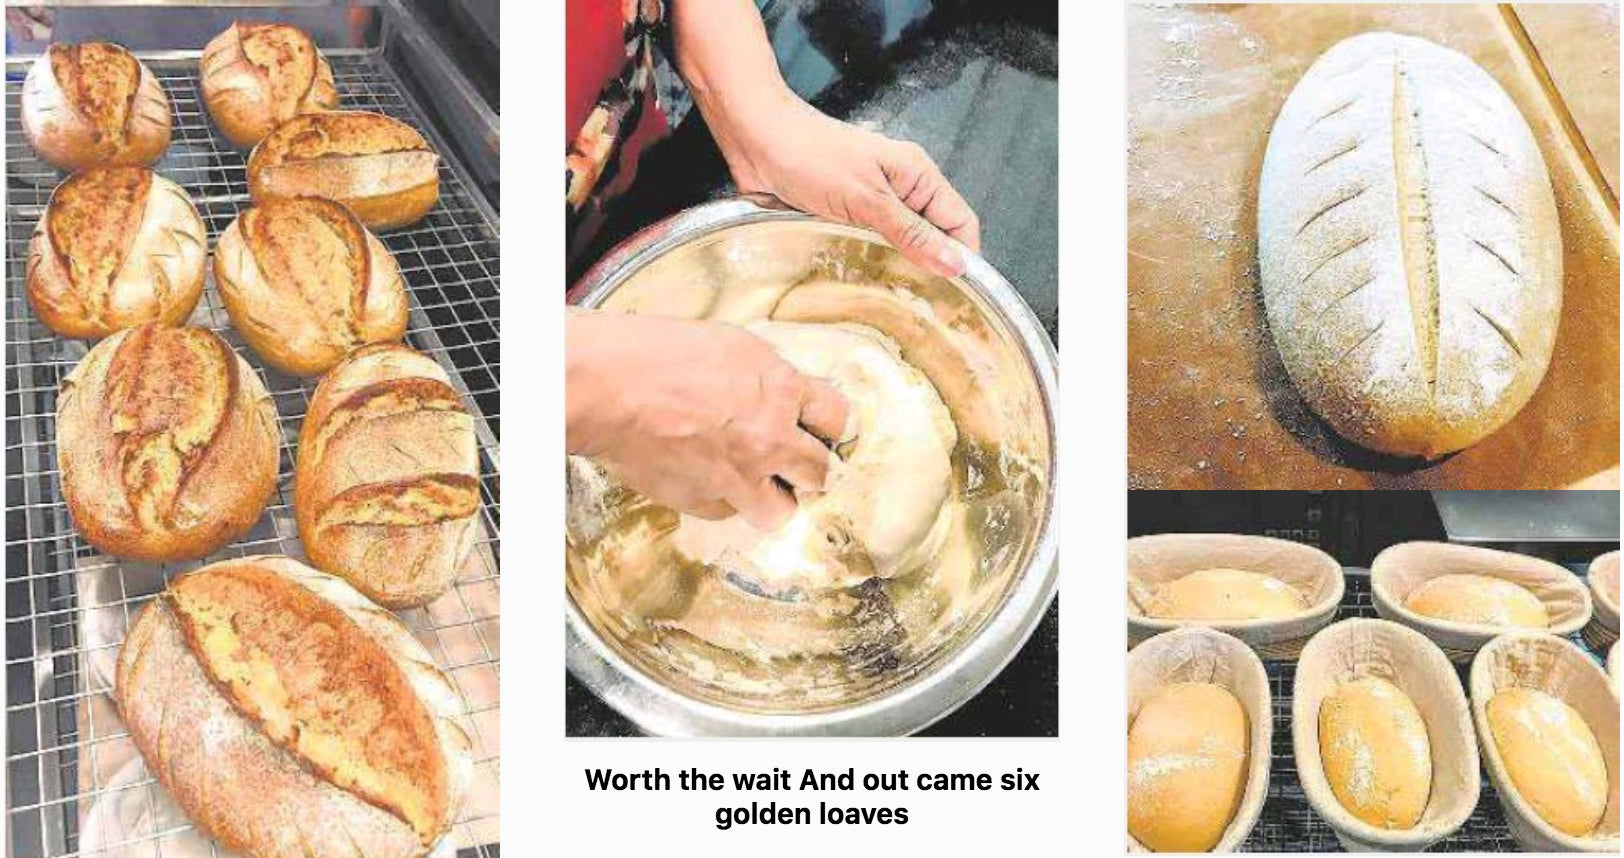 The 'Knead' to Bake images